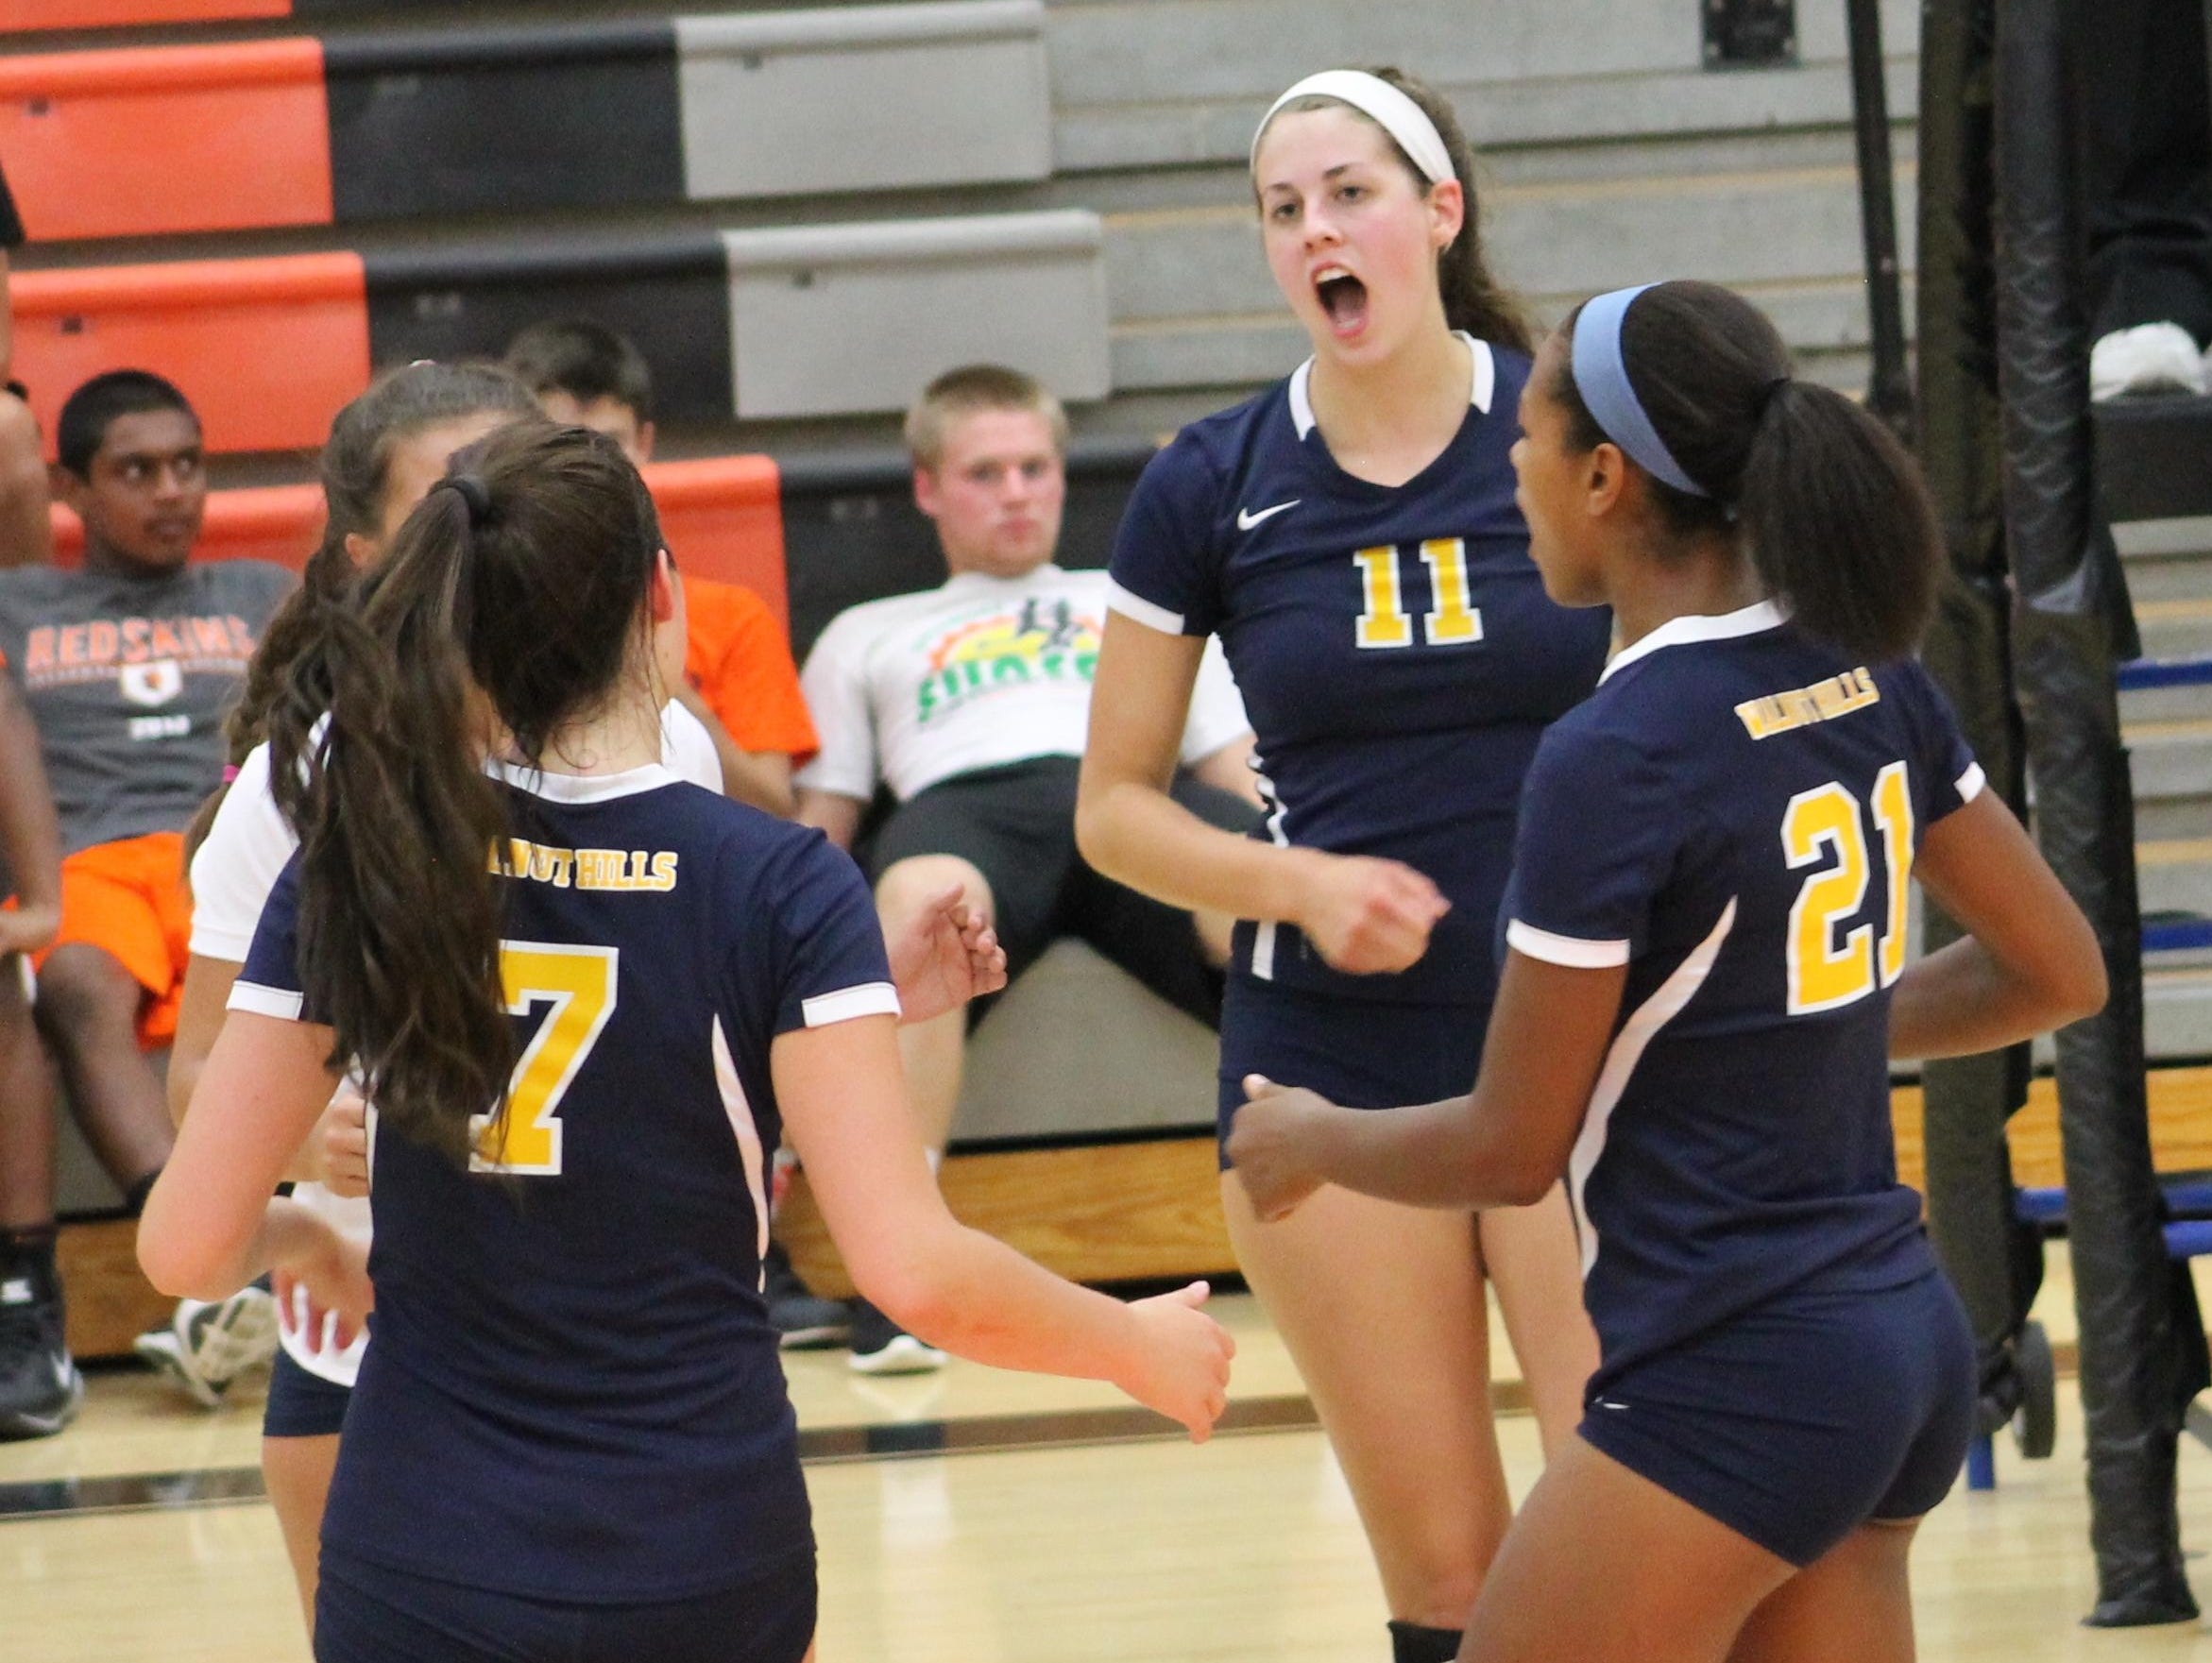 Walnut Hills junior Meredith Shaw leads the celebration after a point with senior Gabrielle Beyrer (7) and senior Janice Donaldson (21).